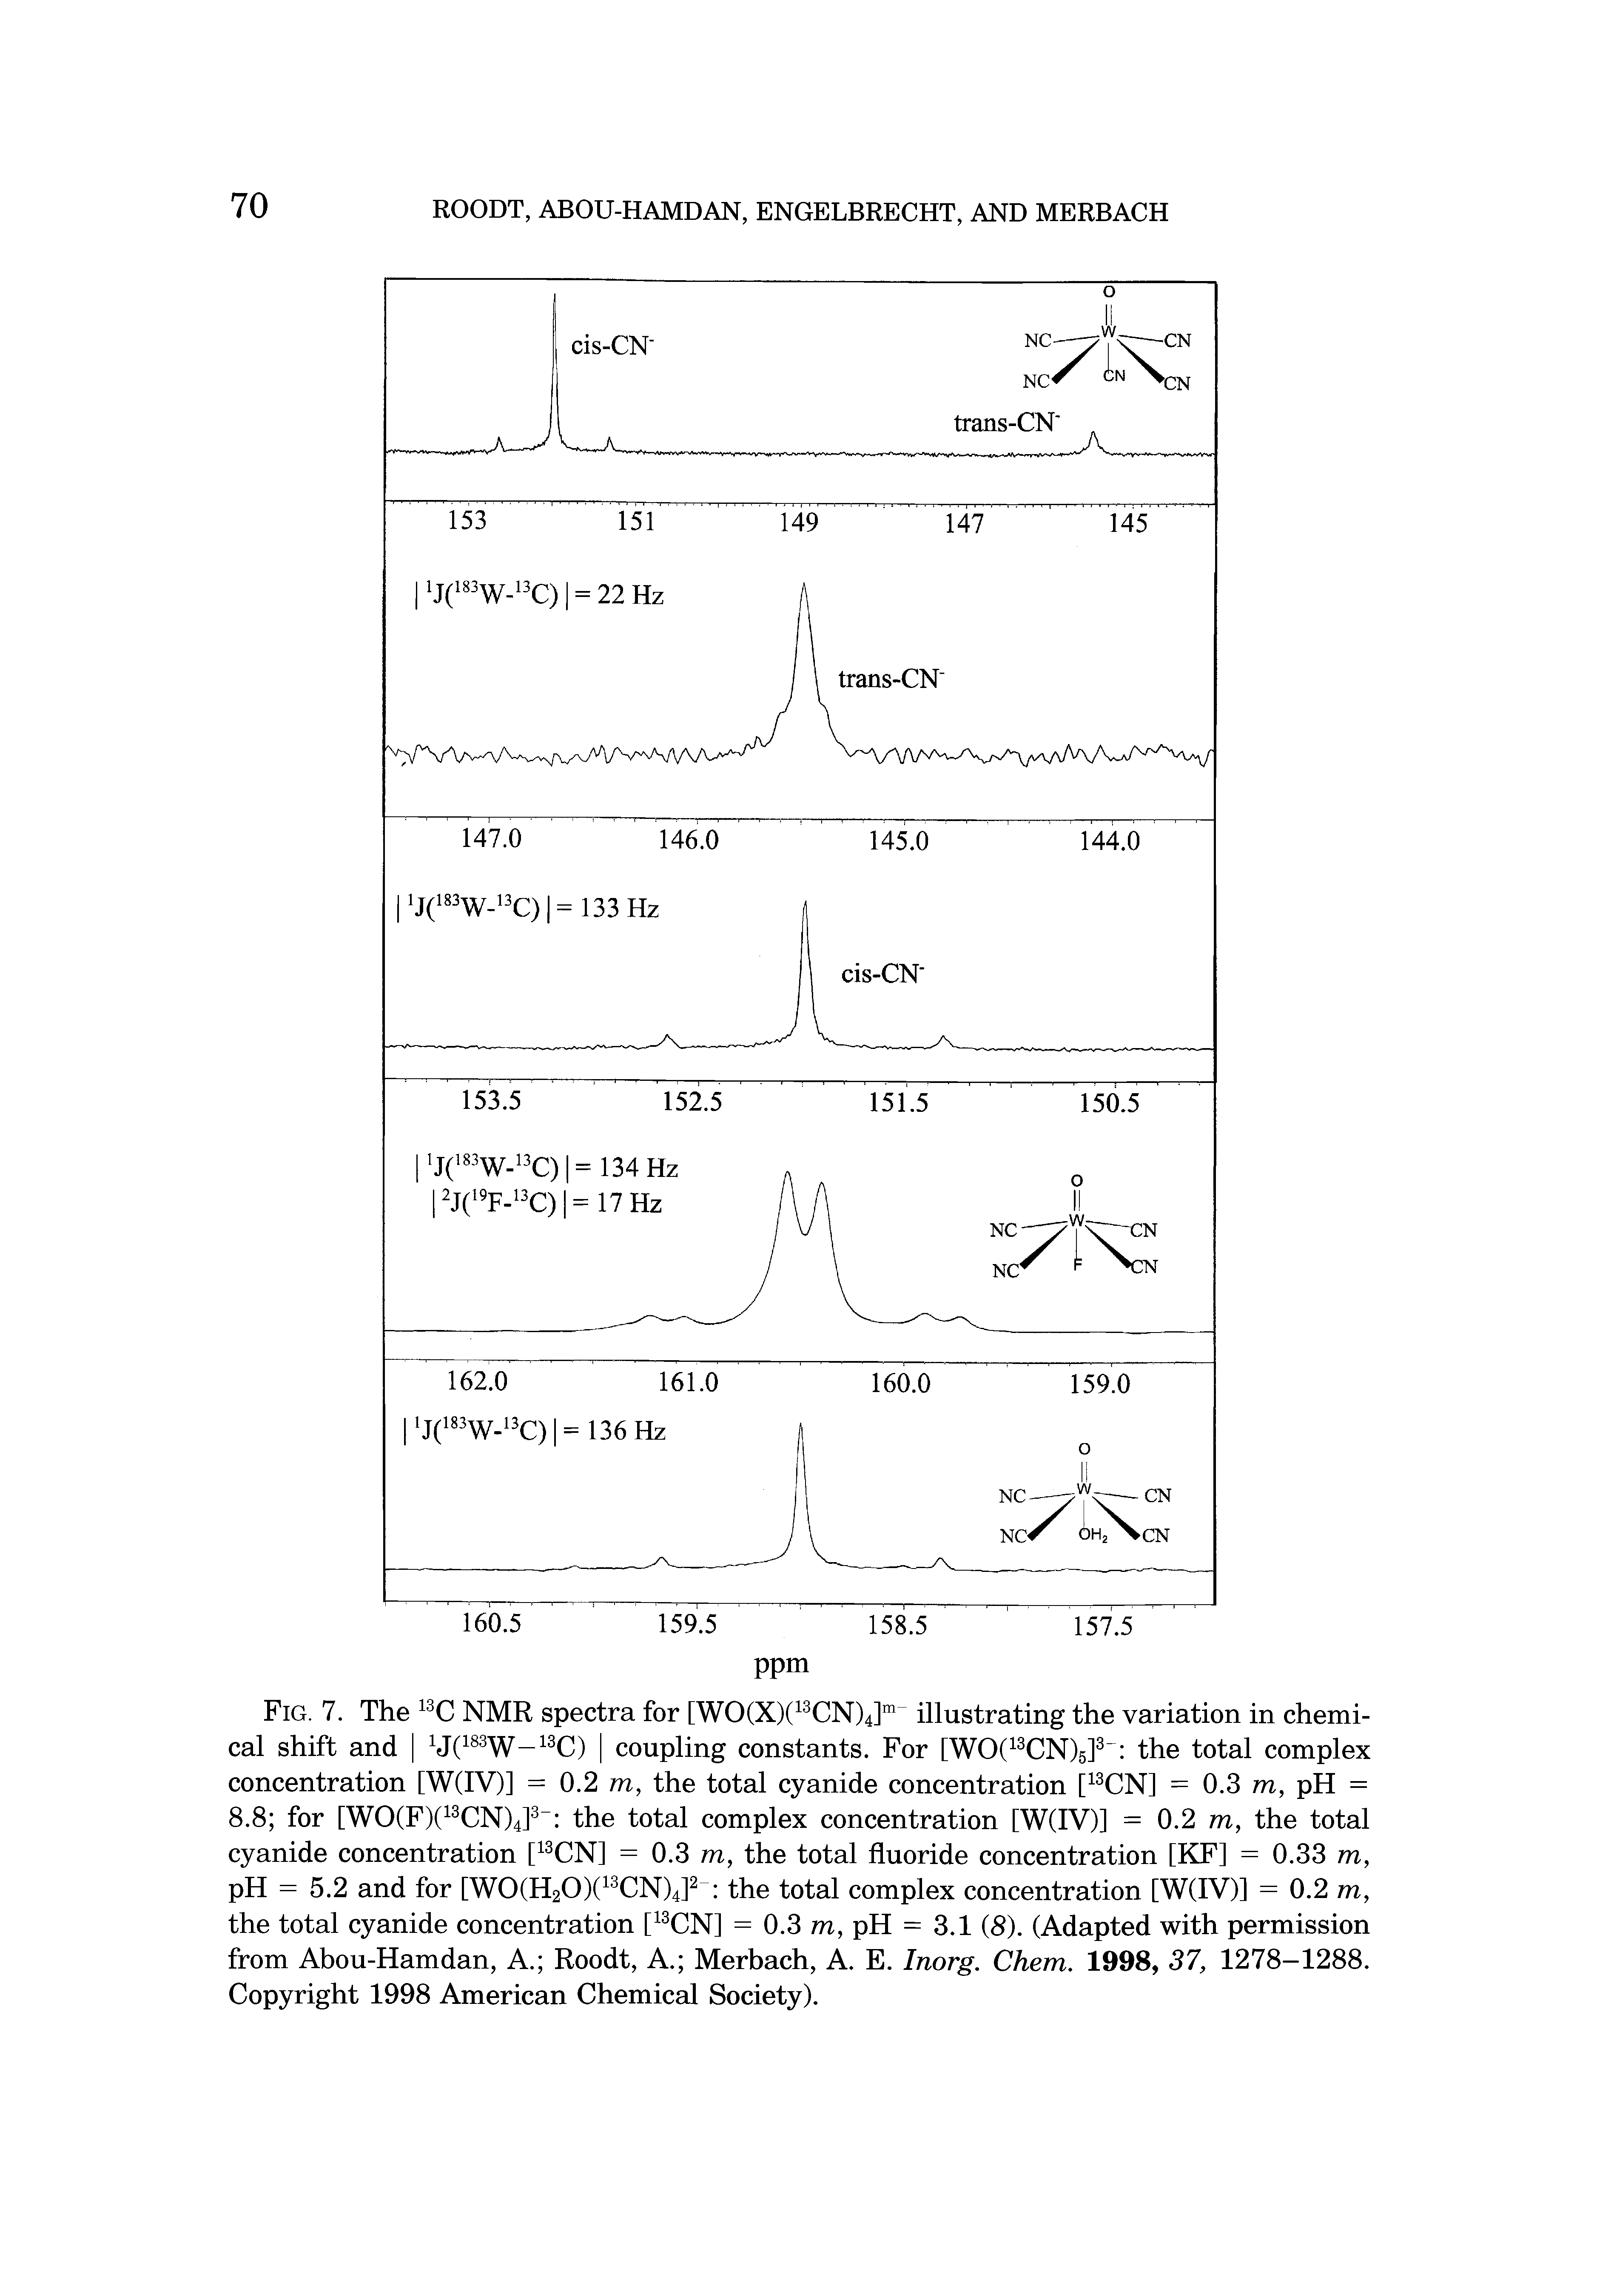 Fig. 7. The 13C NMR spectra for [WO(X)(13CN)4]m illustrating the variation in chemical shift and MO W- C) coupling constants. For [WO(13CN)5]3 the total complex concentration [W(IV)] = 0.2 m, the total cyanide concentration [13CN] = 0.3 m, pH = 8.8 for [WO(F)(13CN)4]3 the total complex concentration [W(IV)] = 0.2 m, the total cyanide concentration [13CN] = 0.3 m, the total fluoride concentration [KF] = 0.33 m, pH = 5.2 and for [W0(H20)(13CN)4]2 the total complex concentration [W(IV)] = 0.2 m, the total cyanide concentration [13CN] = 0.3 m, pH = 3.1 (8). (Adapted with permission from Abou-Hamdan, A. Roodt, A. Merbach, A. E. Inorg. Chem. 1998, 37, 1278-1288. Copyright 1998 American Chemical Society).